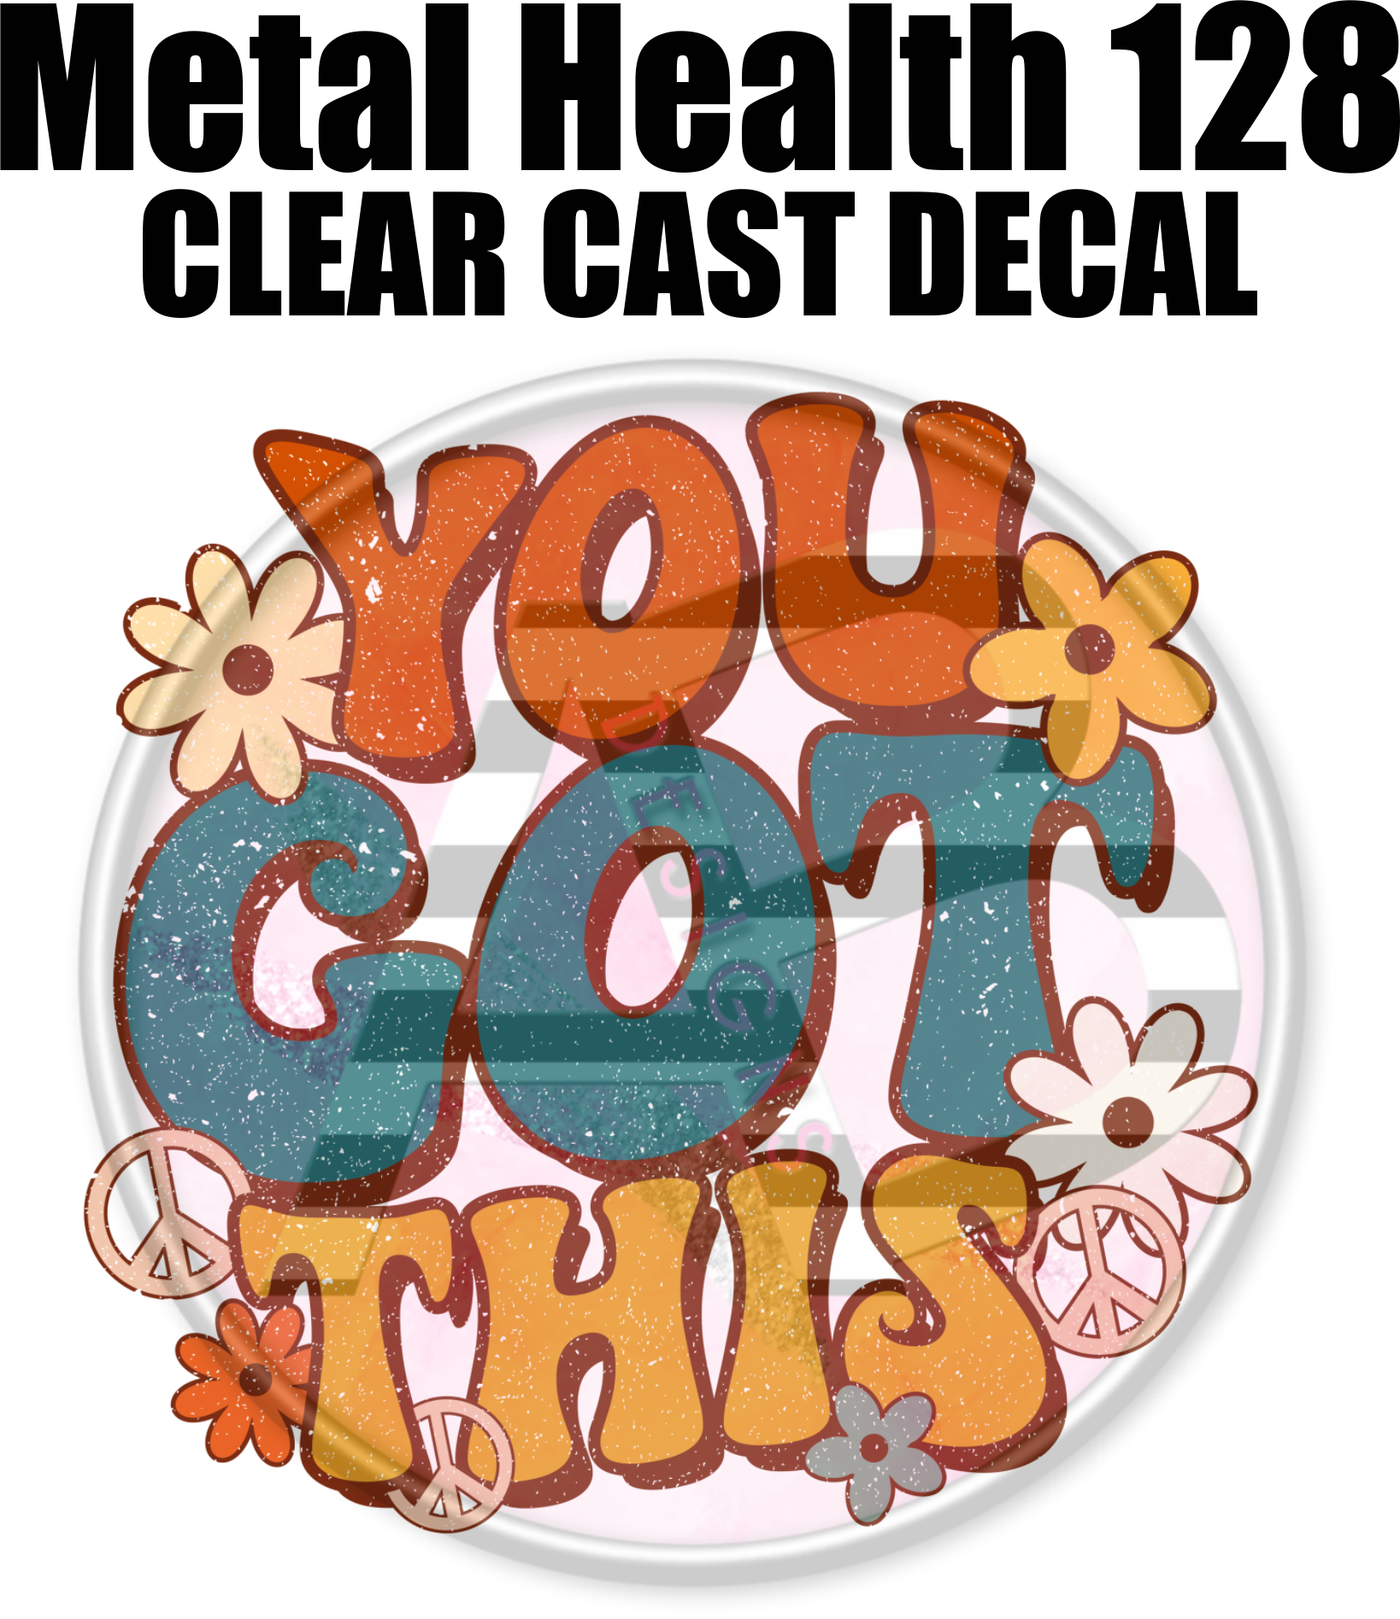 Mental Health 128 - Clear Cast Decal-597